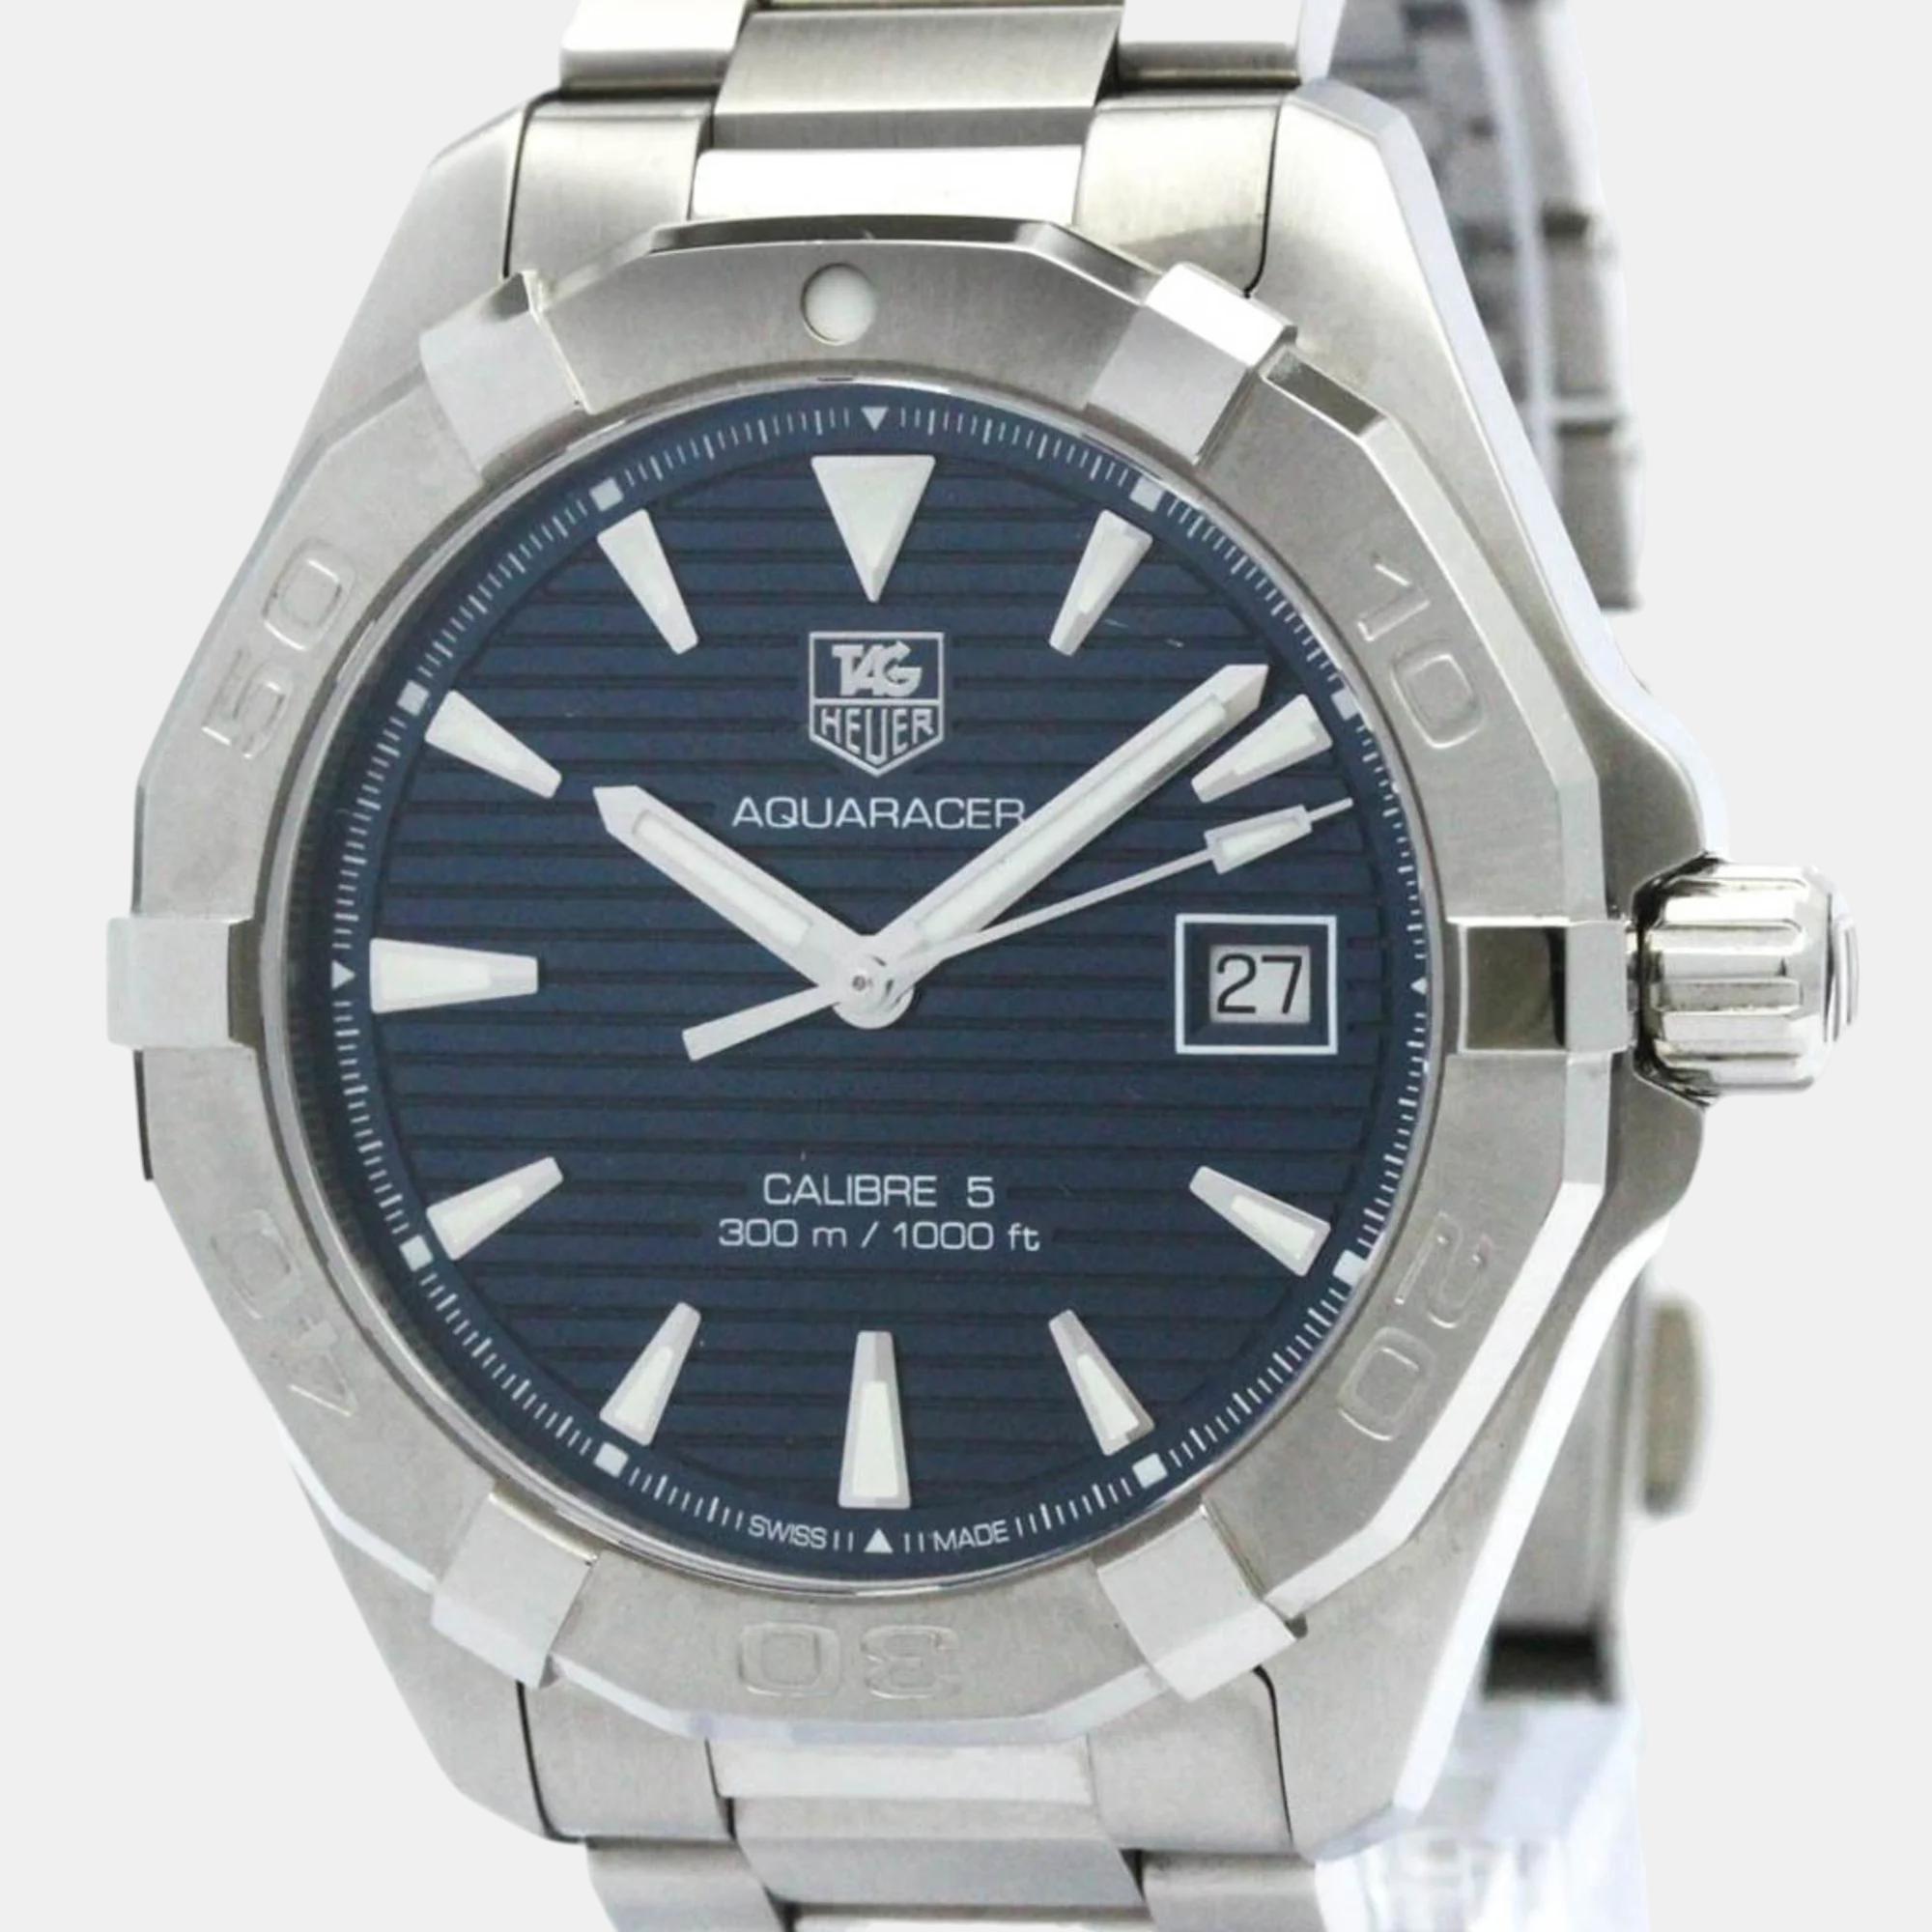 Tag heuer blue stainless steel aquaracer way2112 automatic men's wristwatch 41 mm